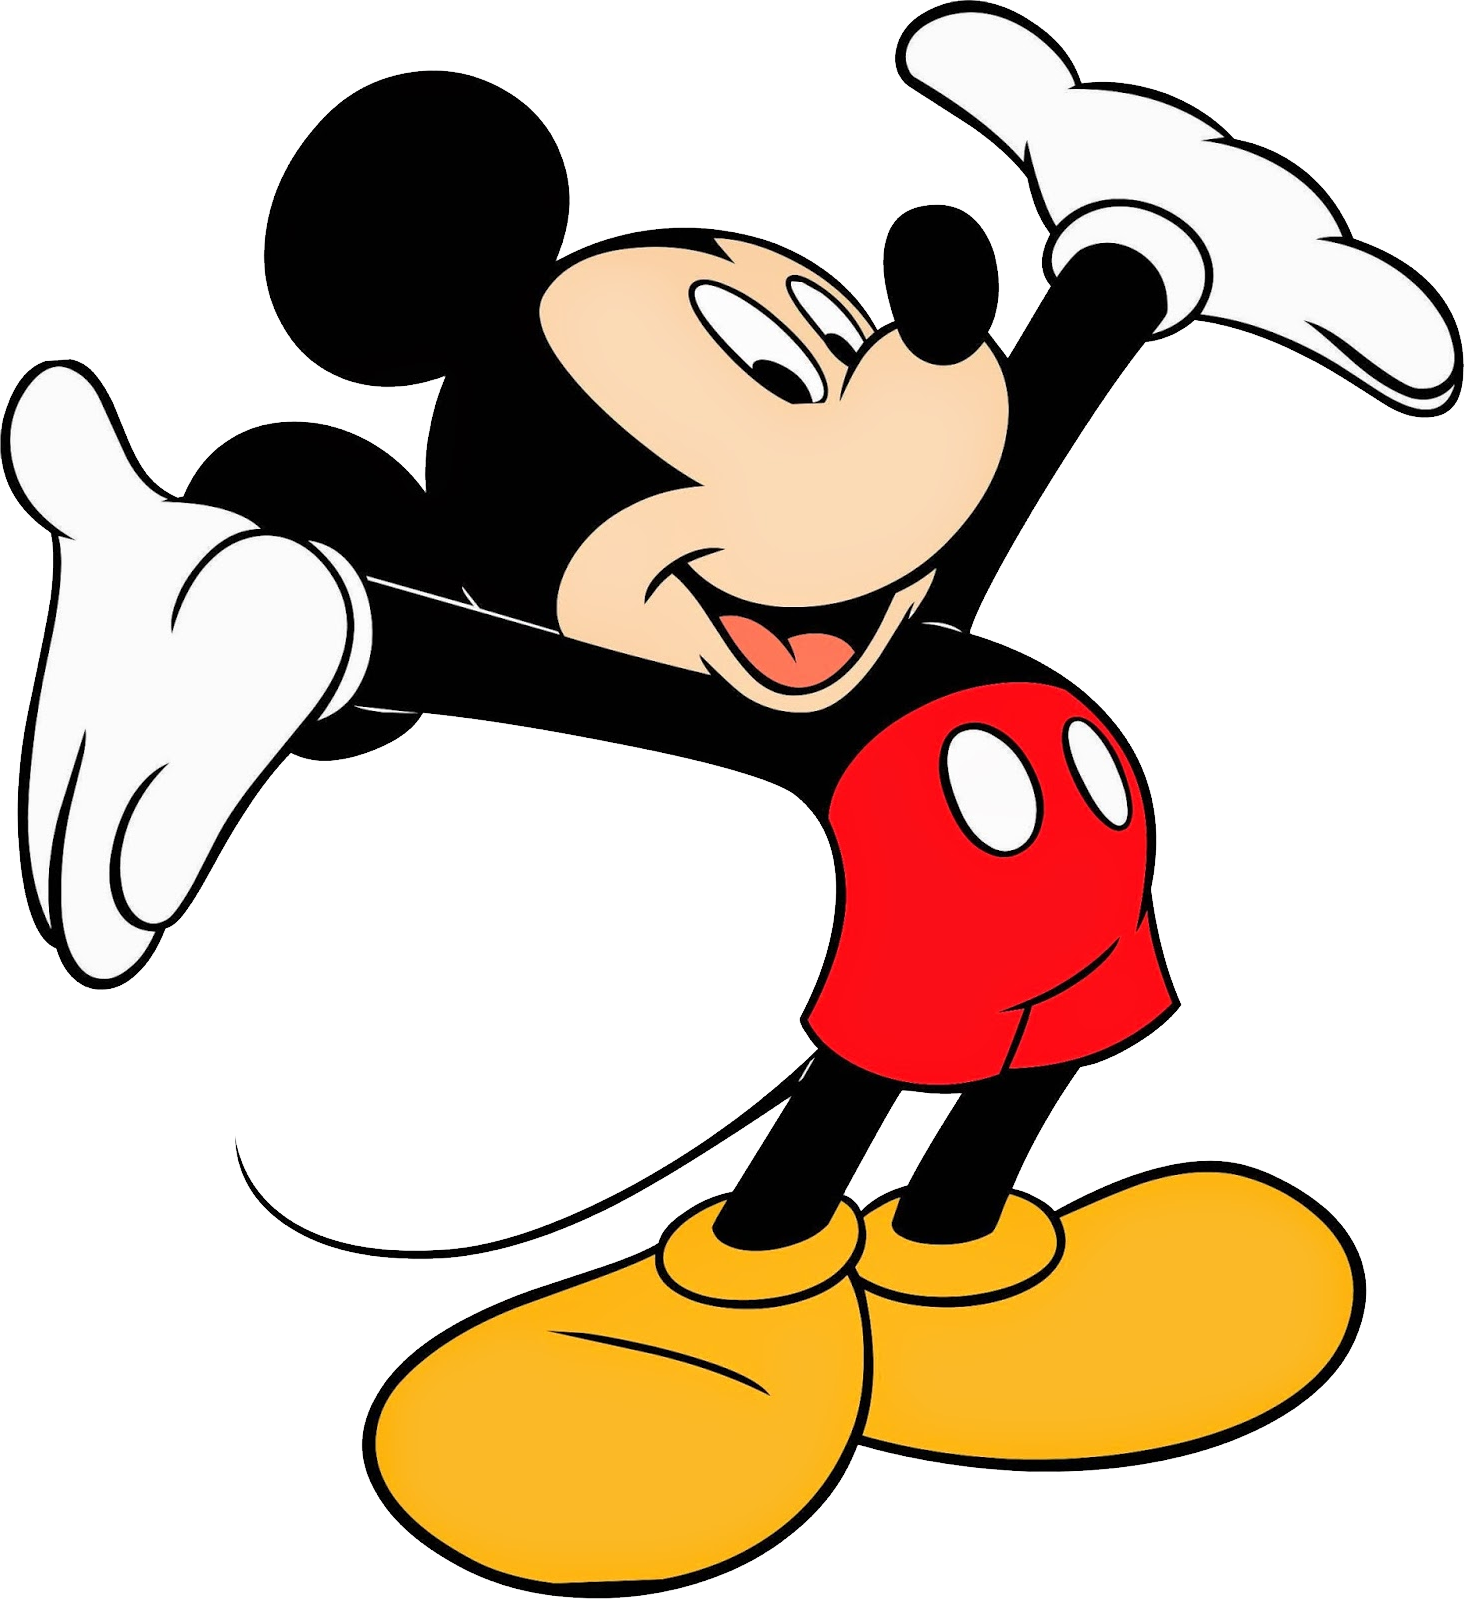 Download Mickey Mouse Happy PNG Image for Free